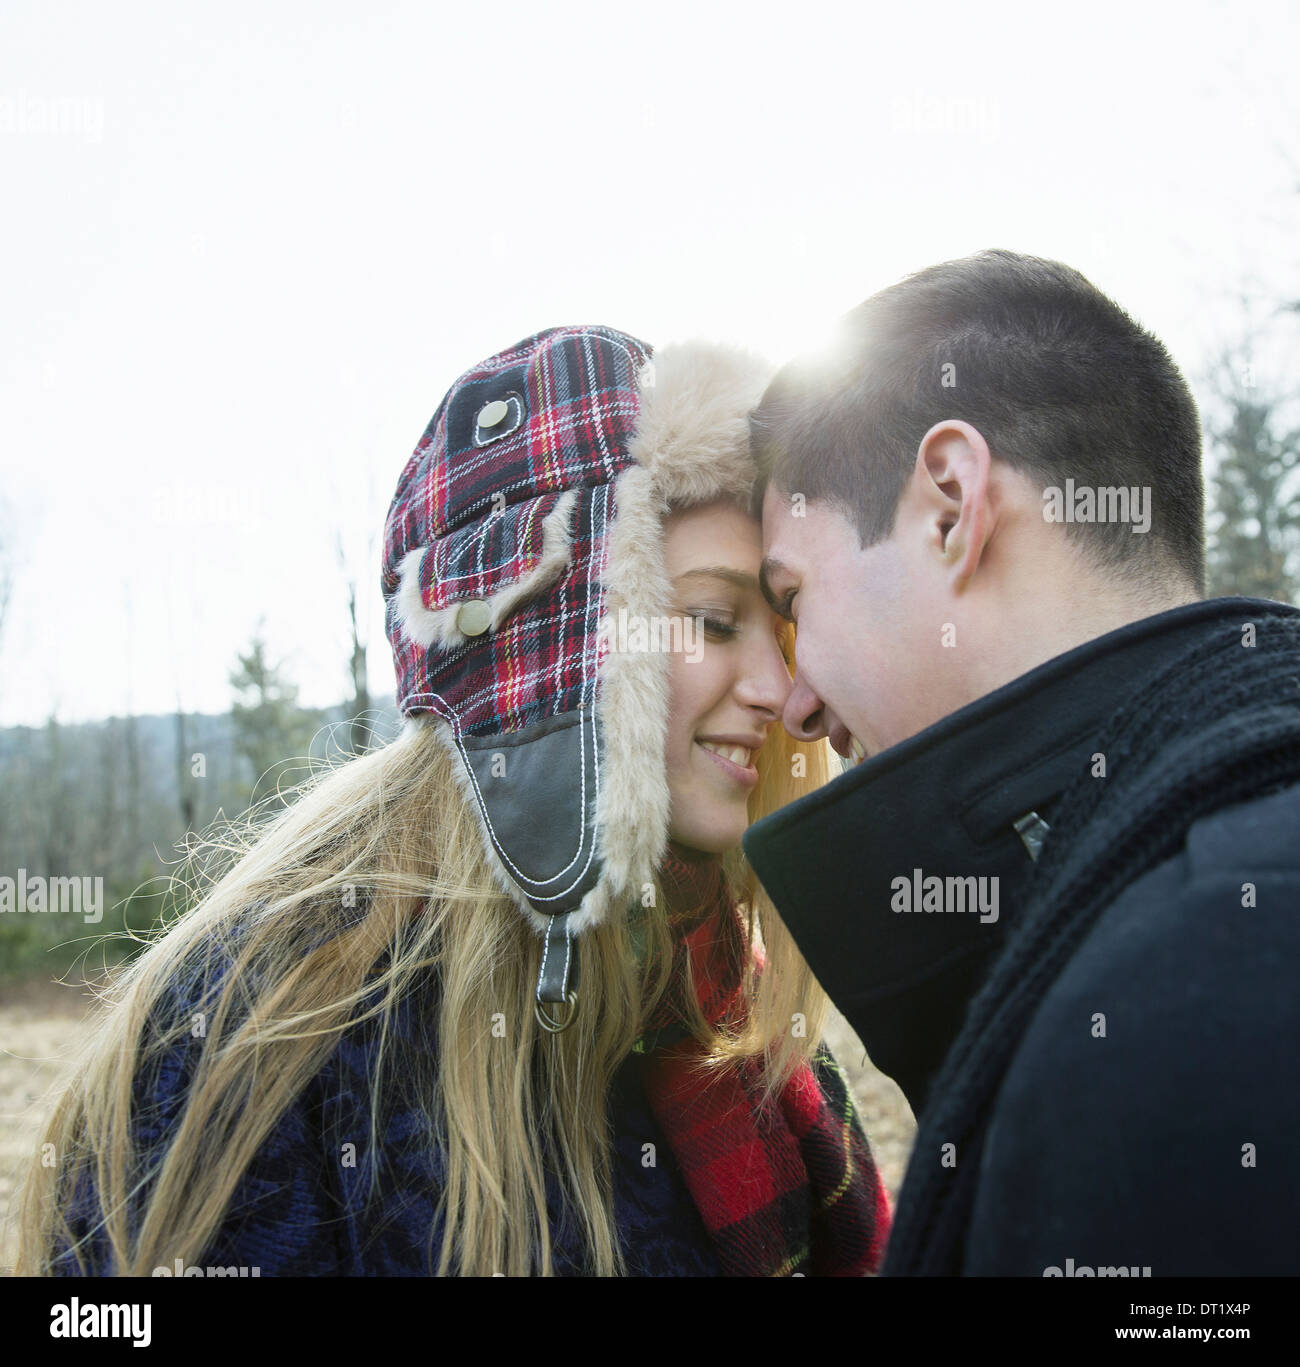 A couple young man and woman face to face embracing outdoors on a cold winter day Stock Photo